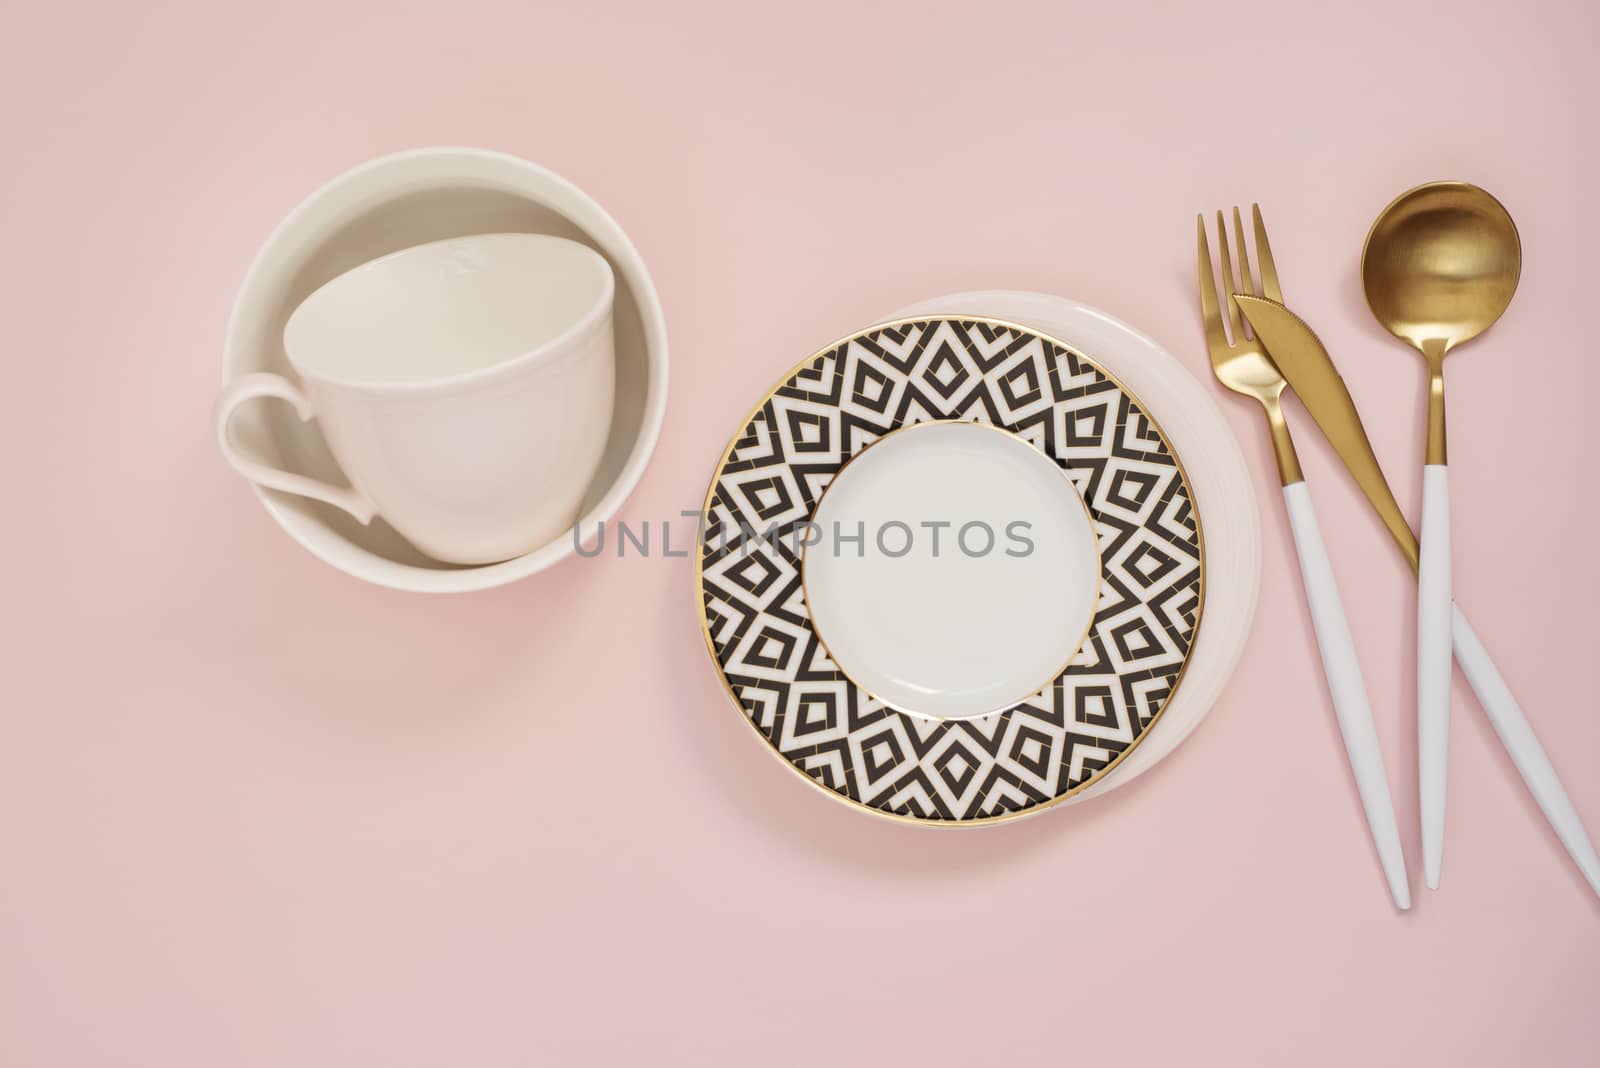 Gold cutlery. Golden spoon set, golden knife, spoon, fork, coffee cup and empty dishes on the table. Luxury spoon set top of view. Pastel punchy pink background